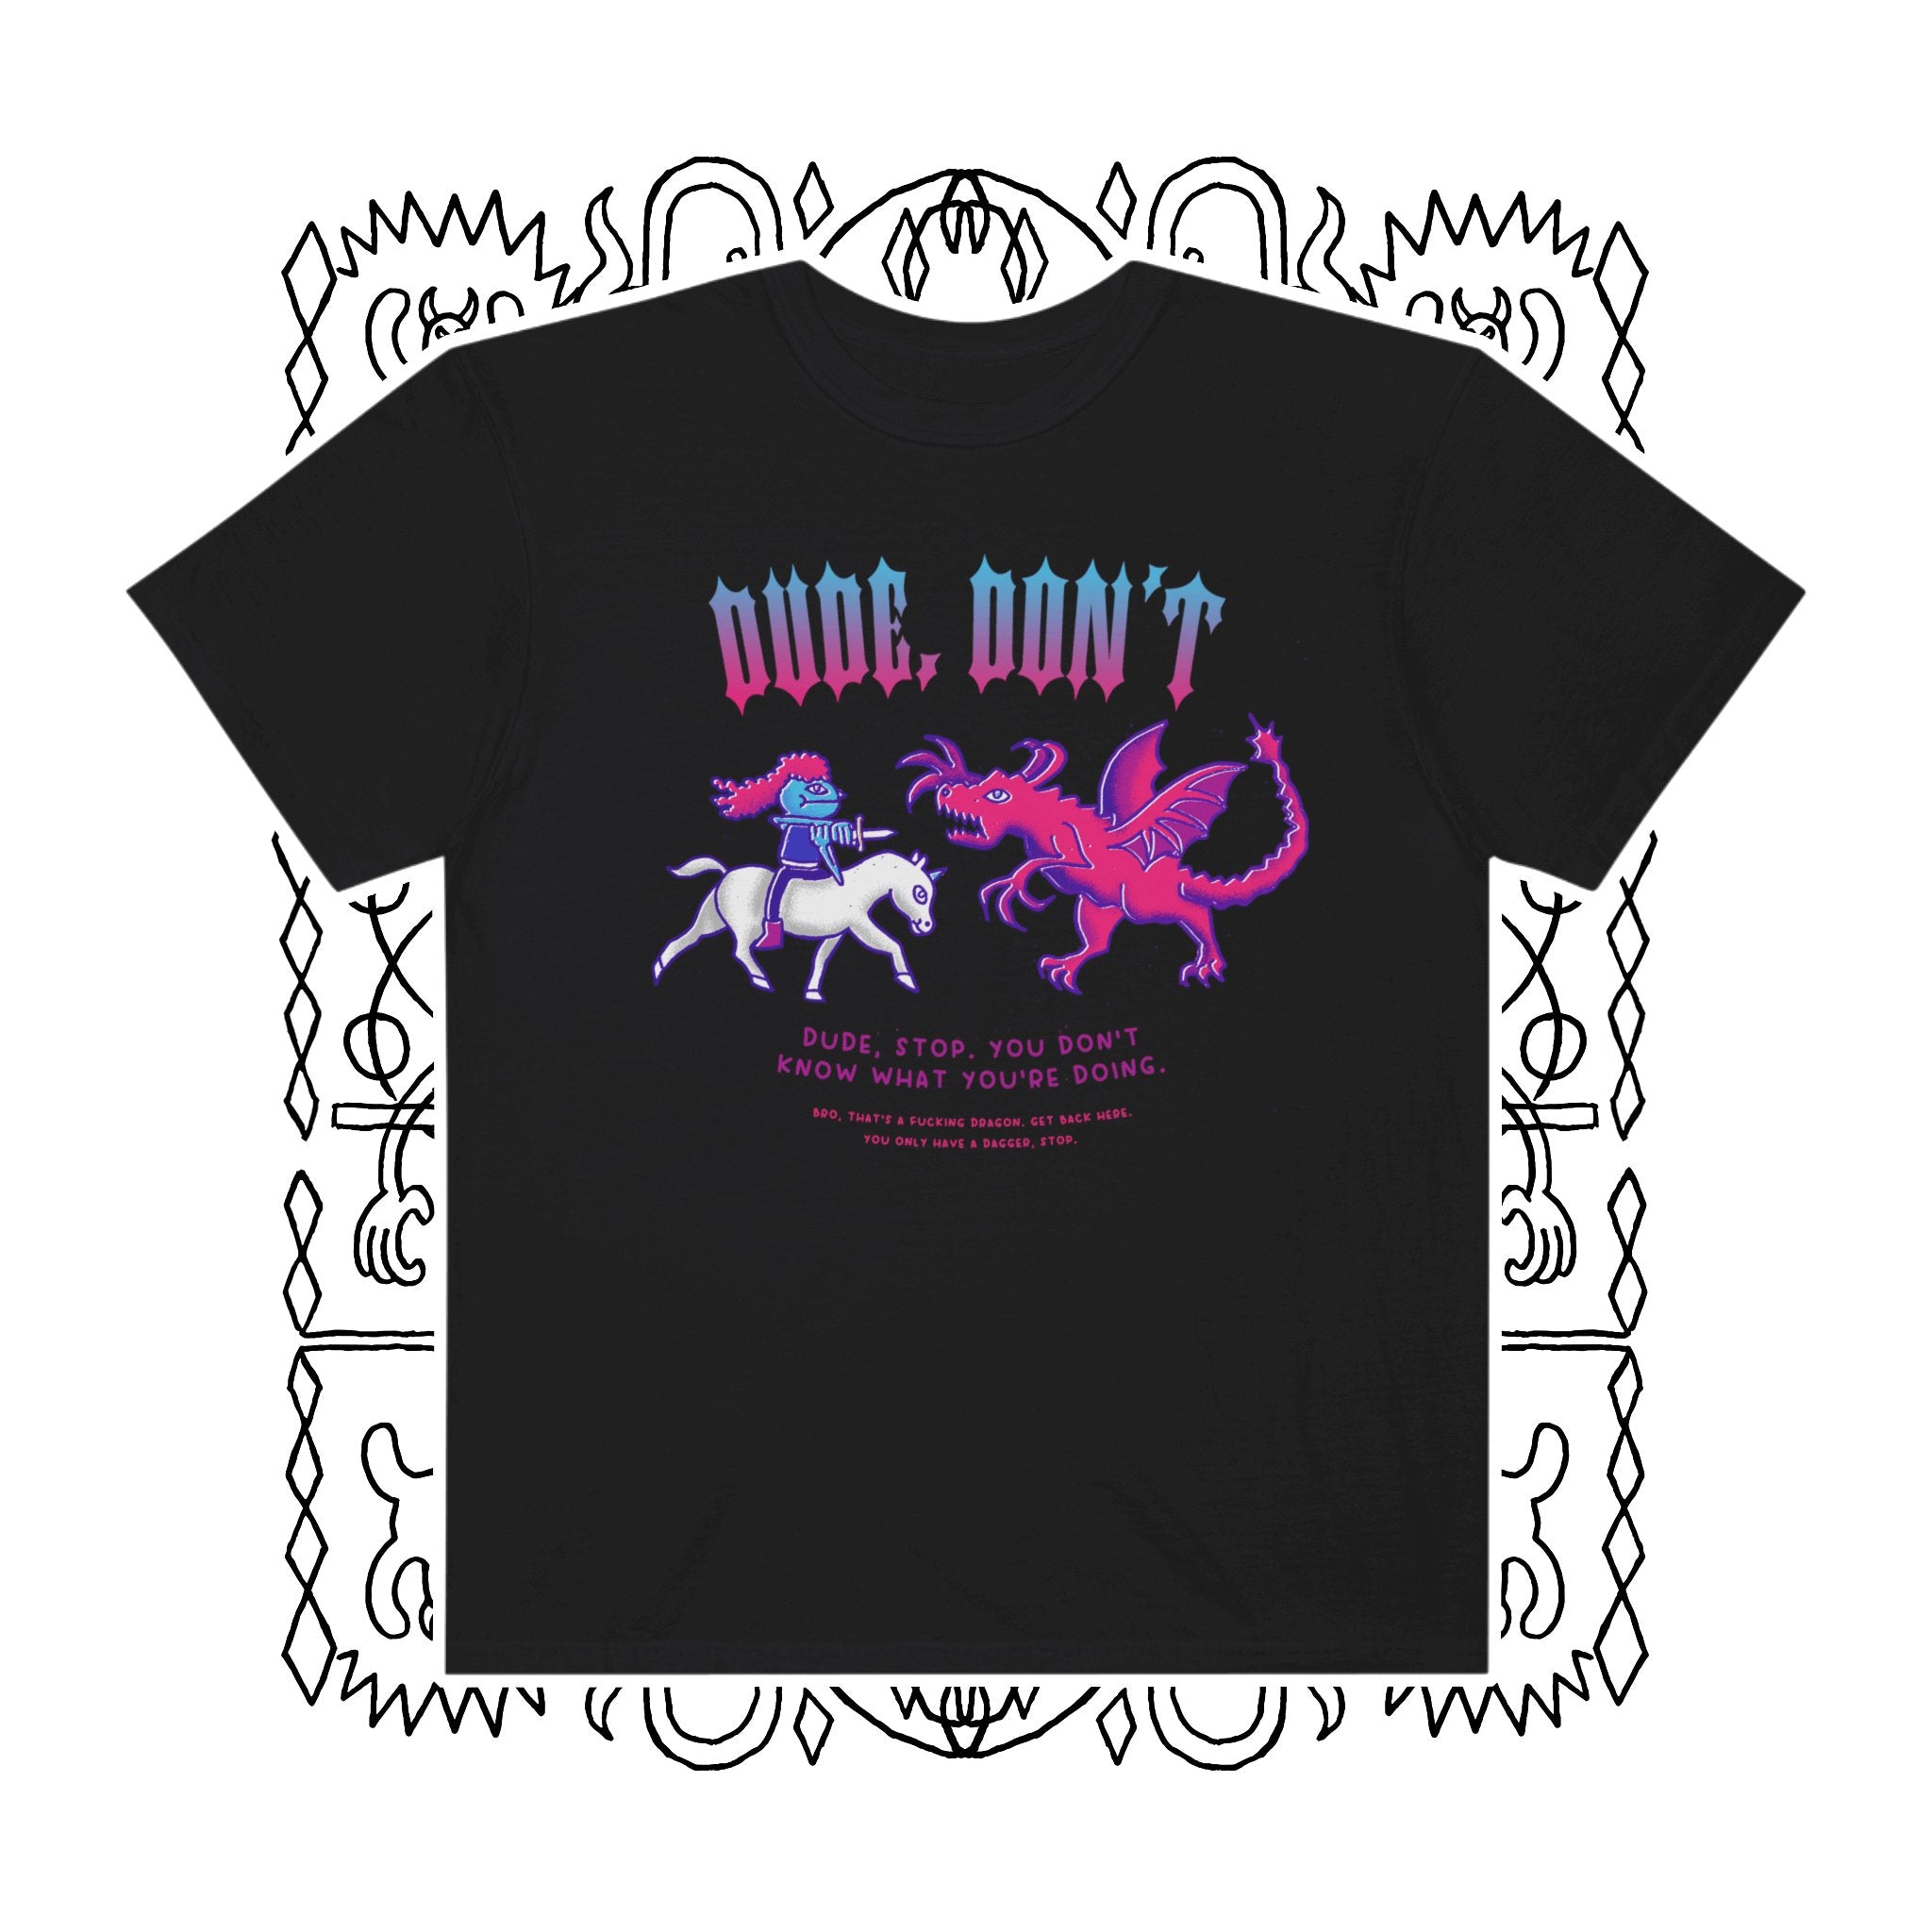 Dude, Don't | Comfort Colors T-shirt - T-Shirt - Ace of Gnomes - 12118200760702821109